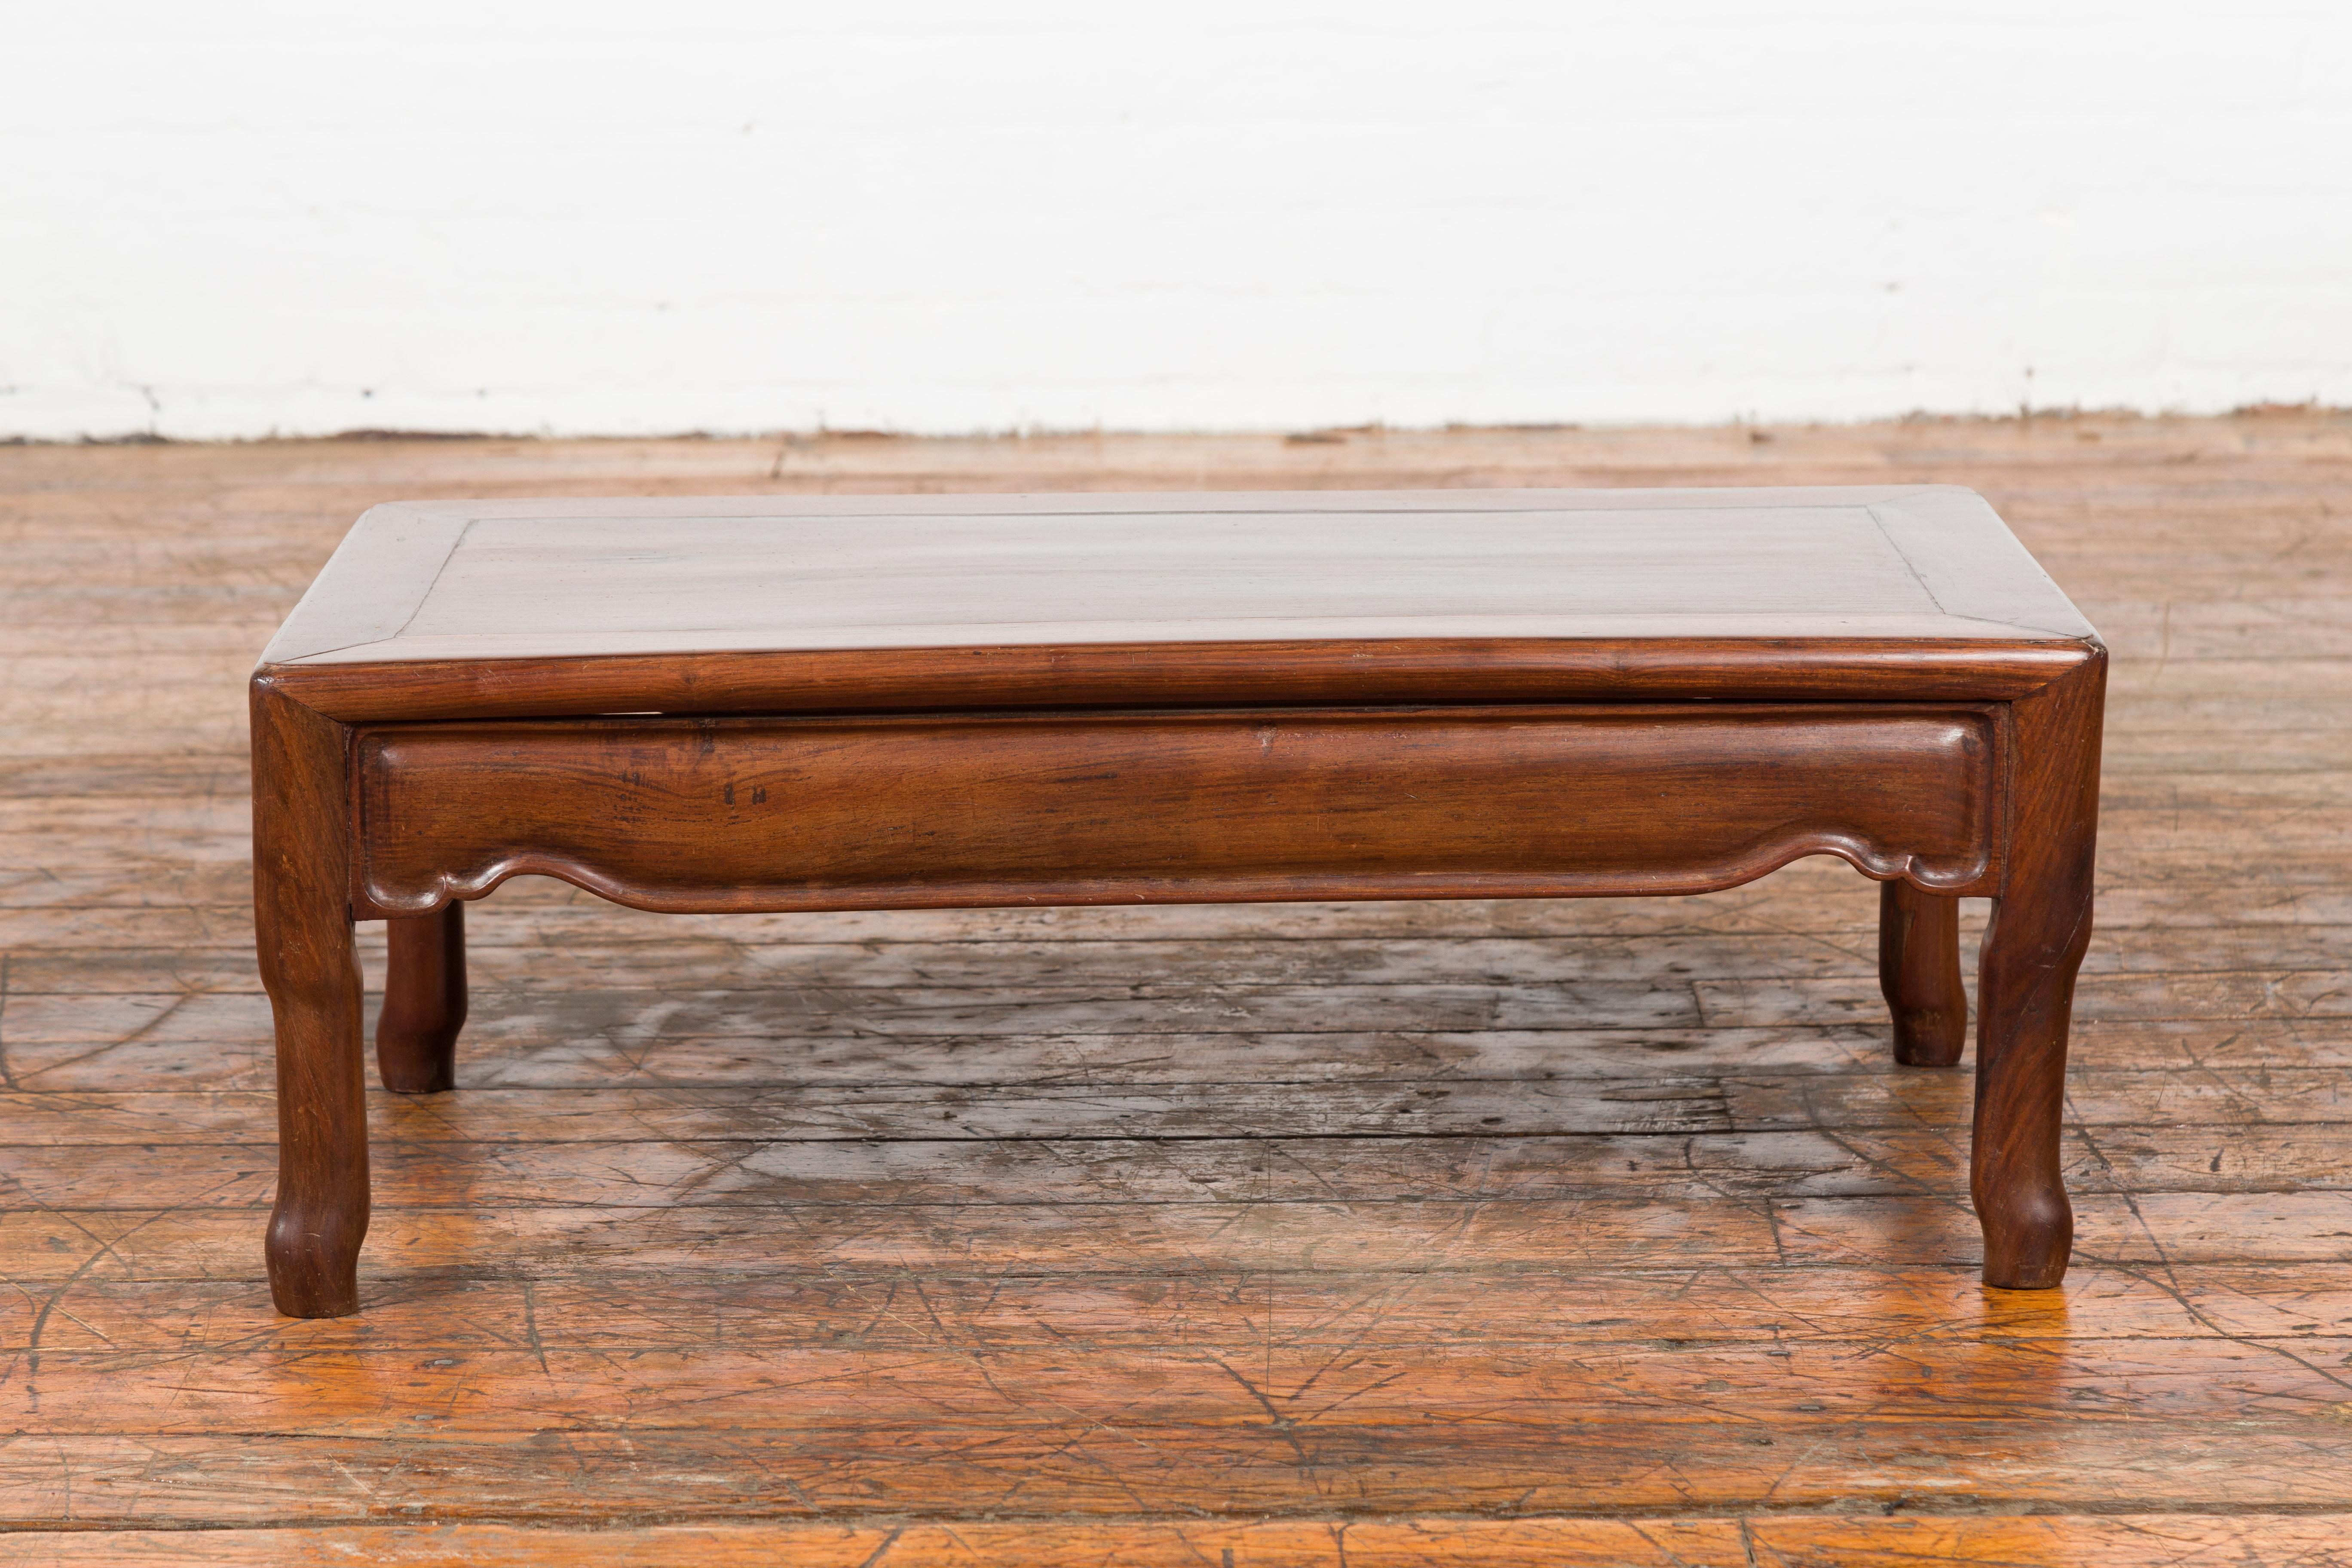 A vintage Chinese Art Deco style low prayer table from the 20th century, with carved apron. Created in China, this Art Deco style prayer table features a rectangular top with central board, sitting above an apron carved on all side. Raised on four